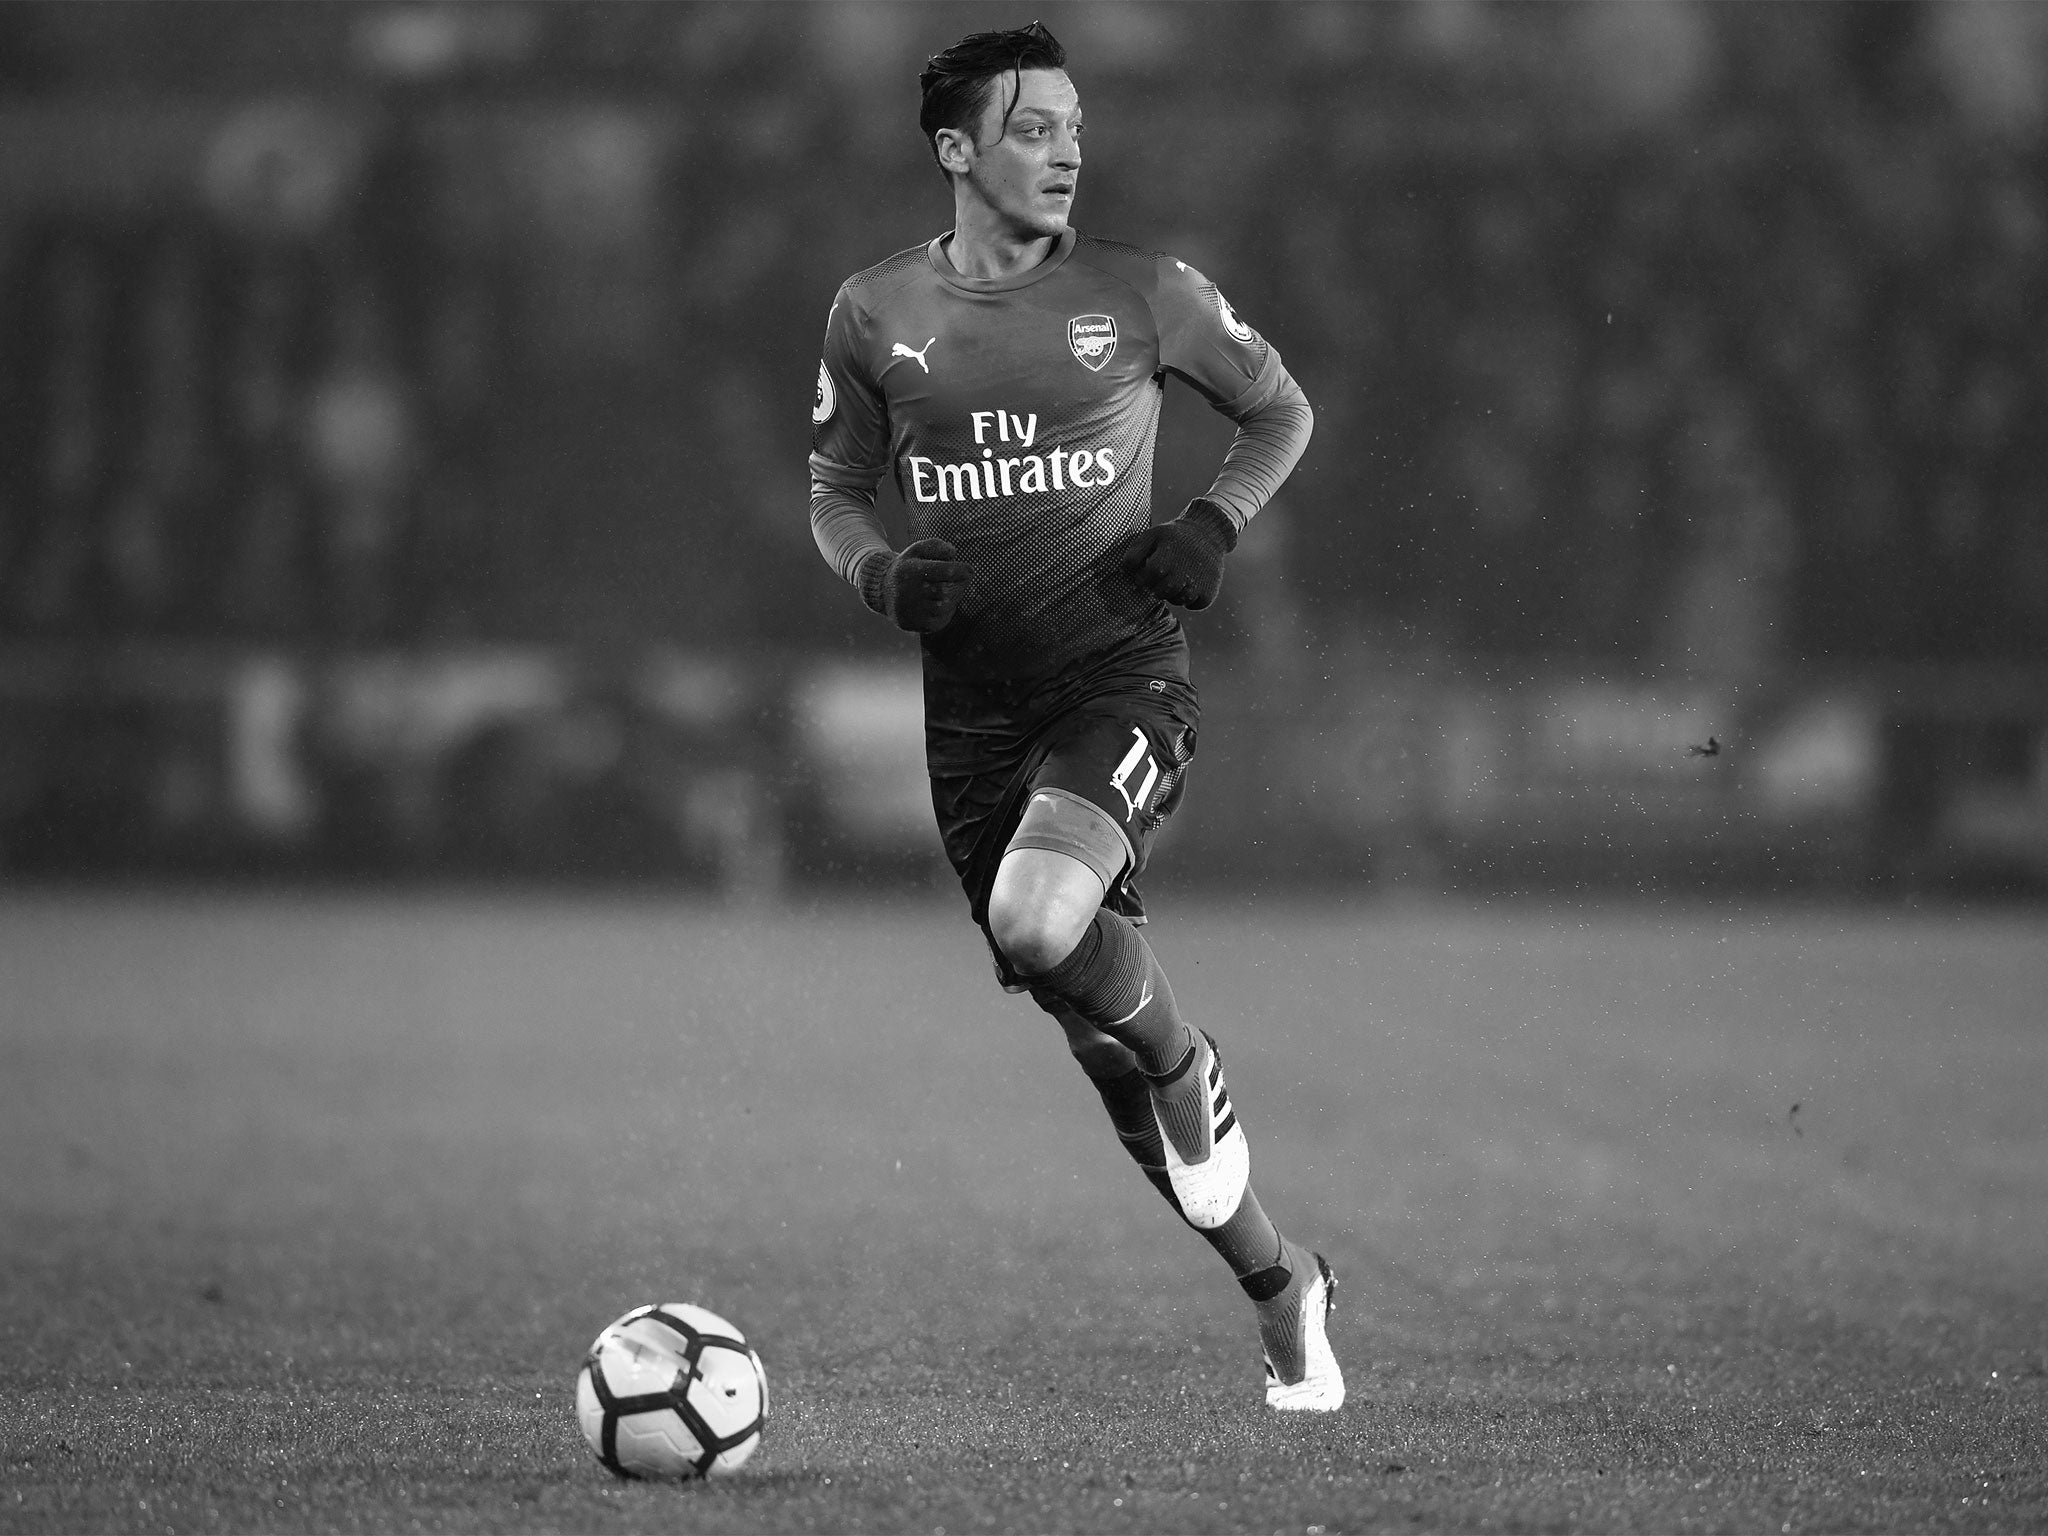 Mesut Ozil is a significant re-signing for Arsenal